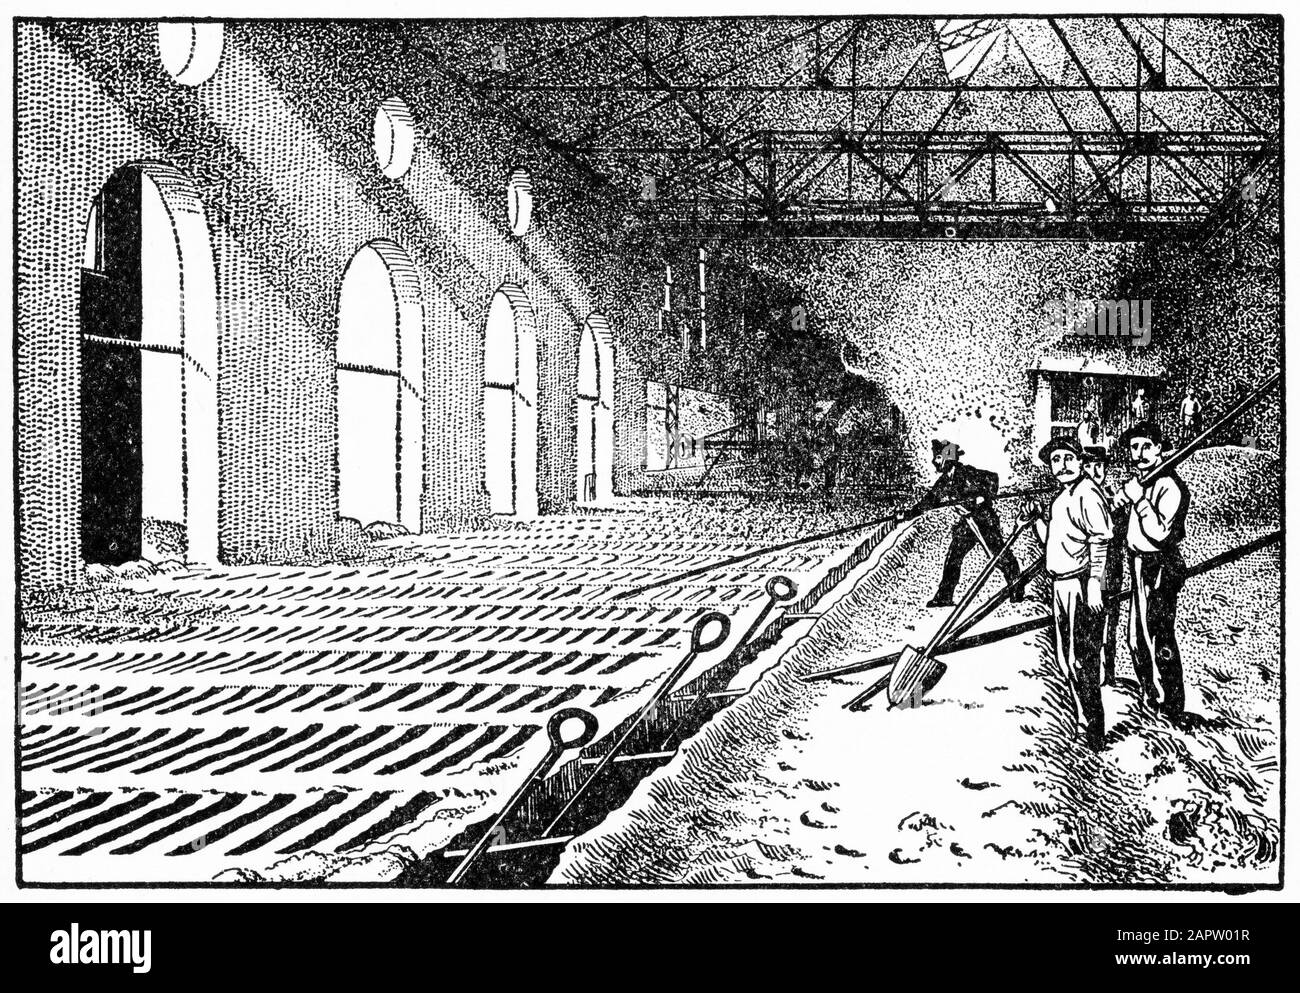 Engraving of men casting pig iron in a foundry. Based on a photograph of the Iroquois smelter, Chicago. Stock Photo